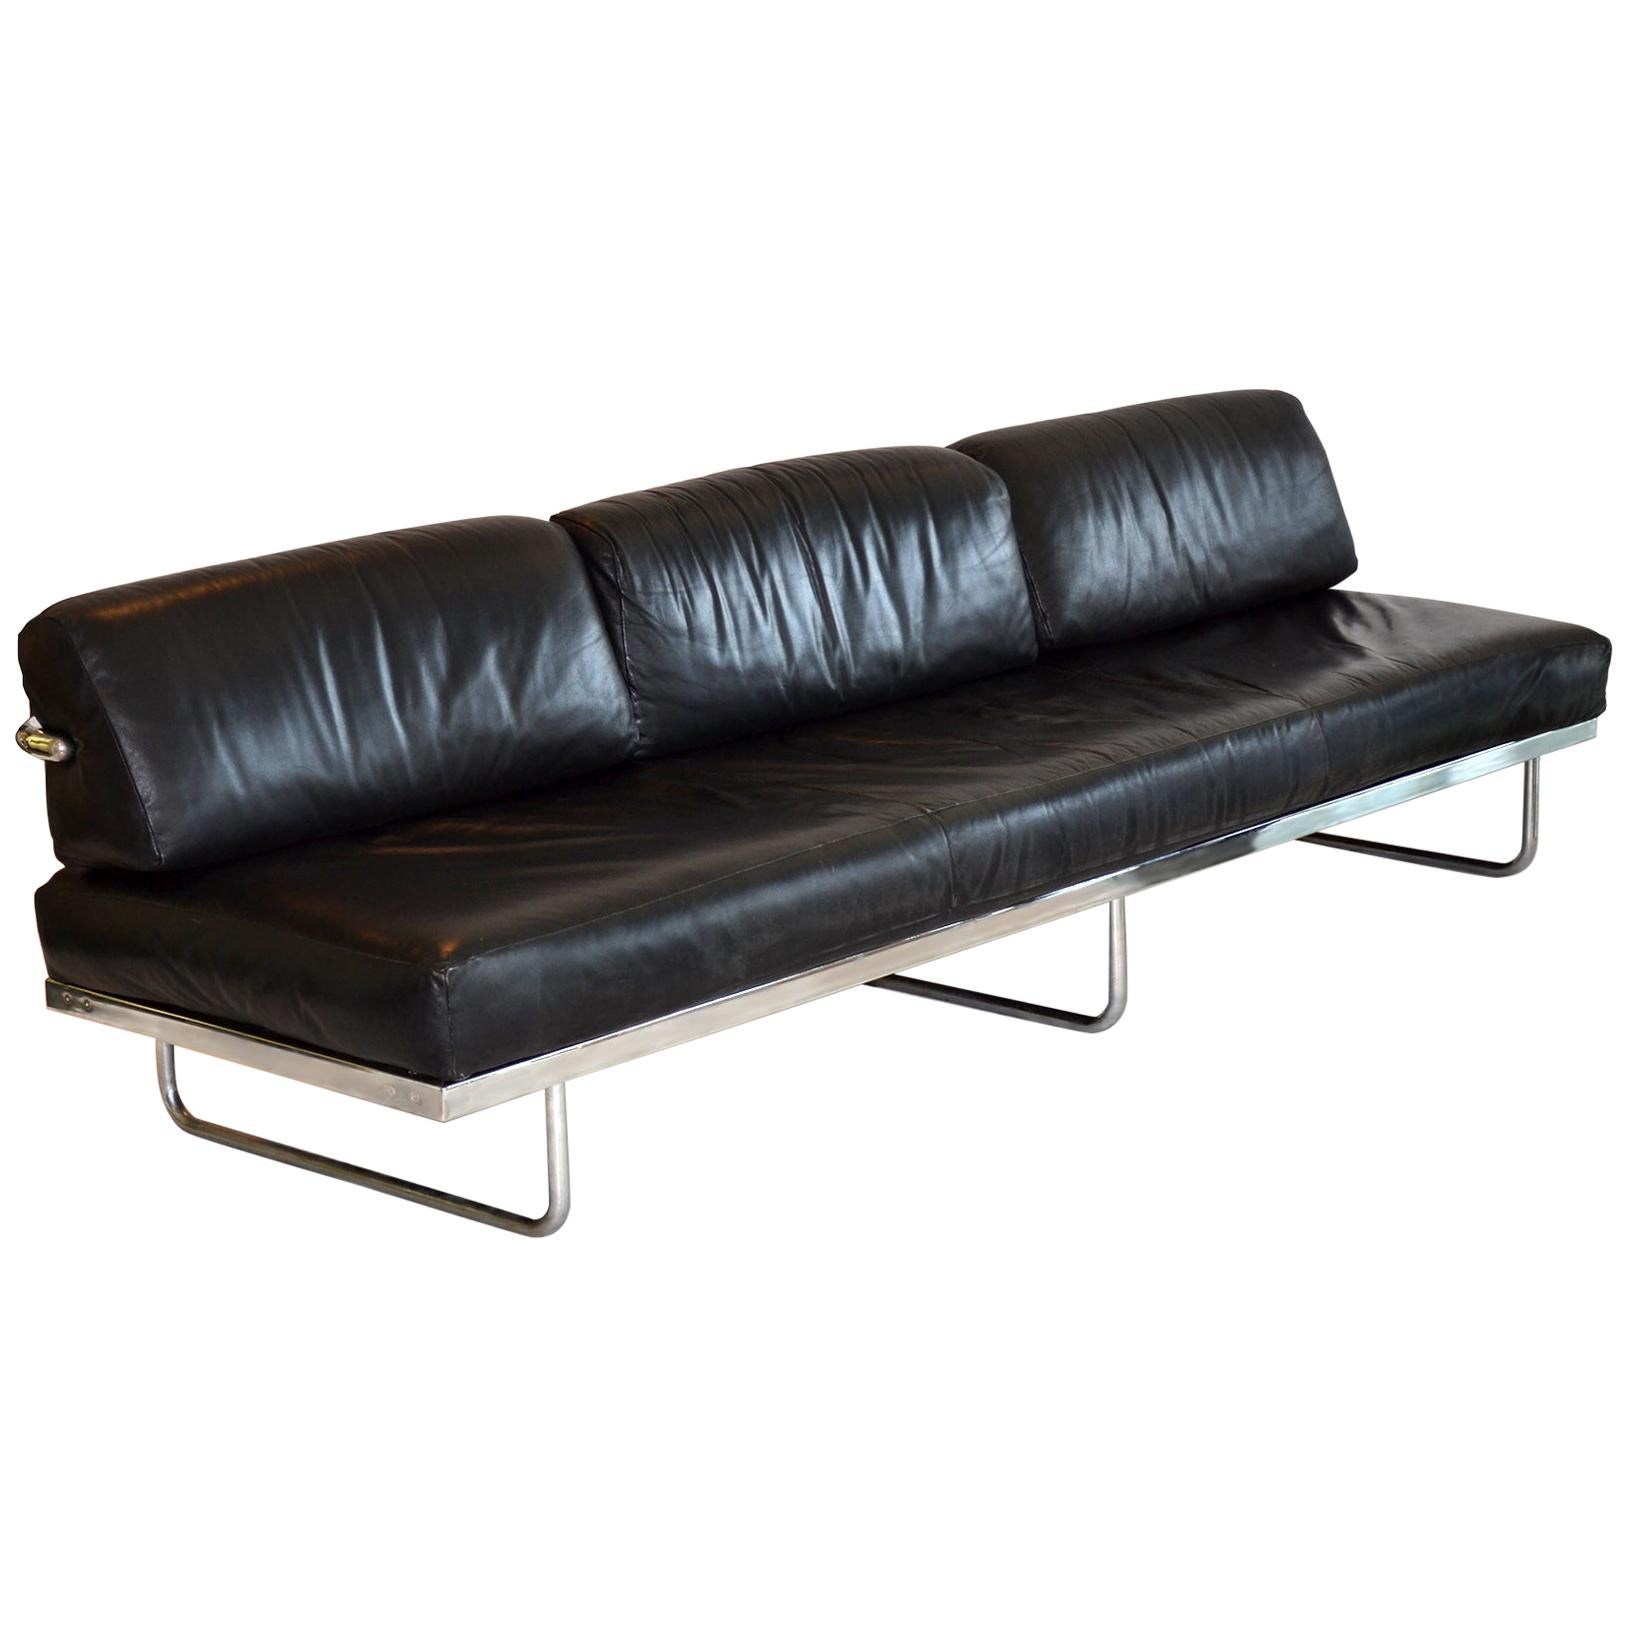 Rare Early LC5 Leather Sofa Le Corbusier, Jeanneret, Perriand, Cassina,  Italy at 1stDibs | le corbusier lc5 sofa, recumbent position on a bed or  couch